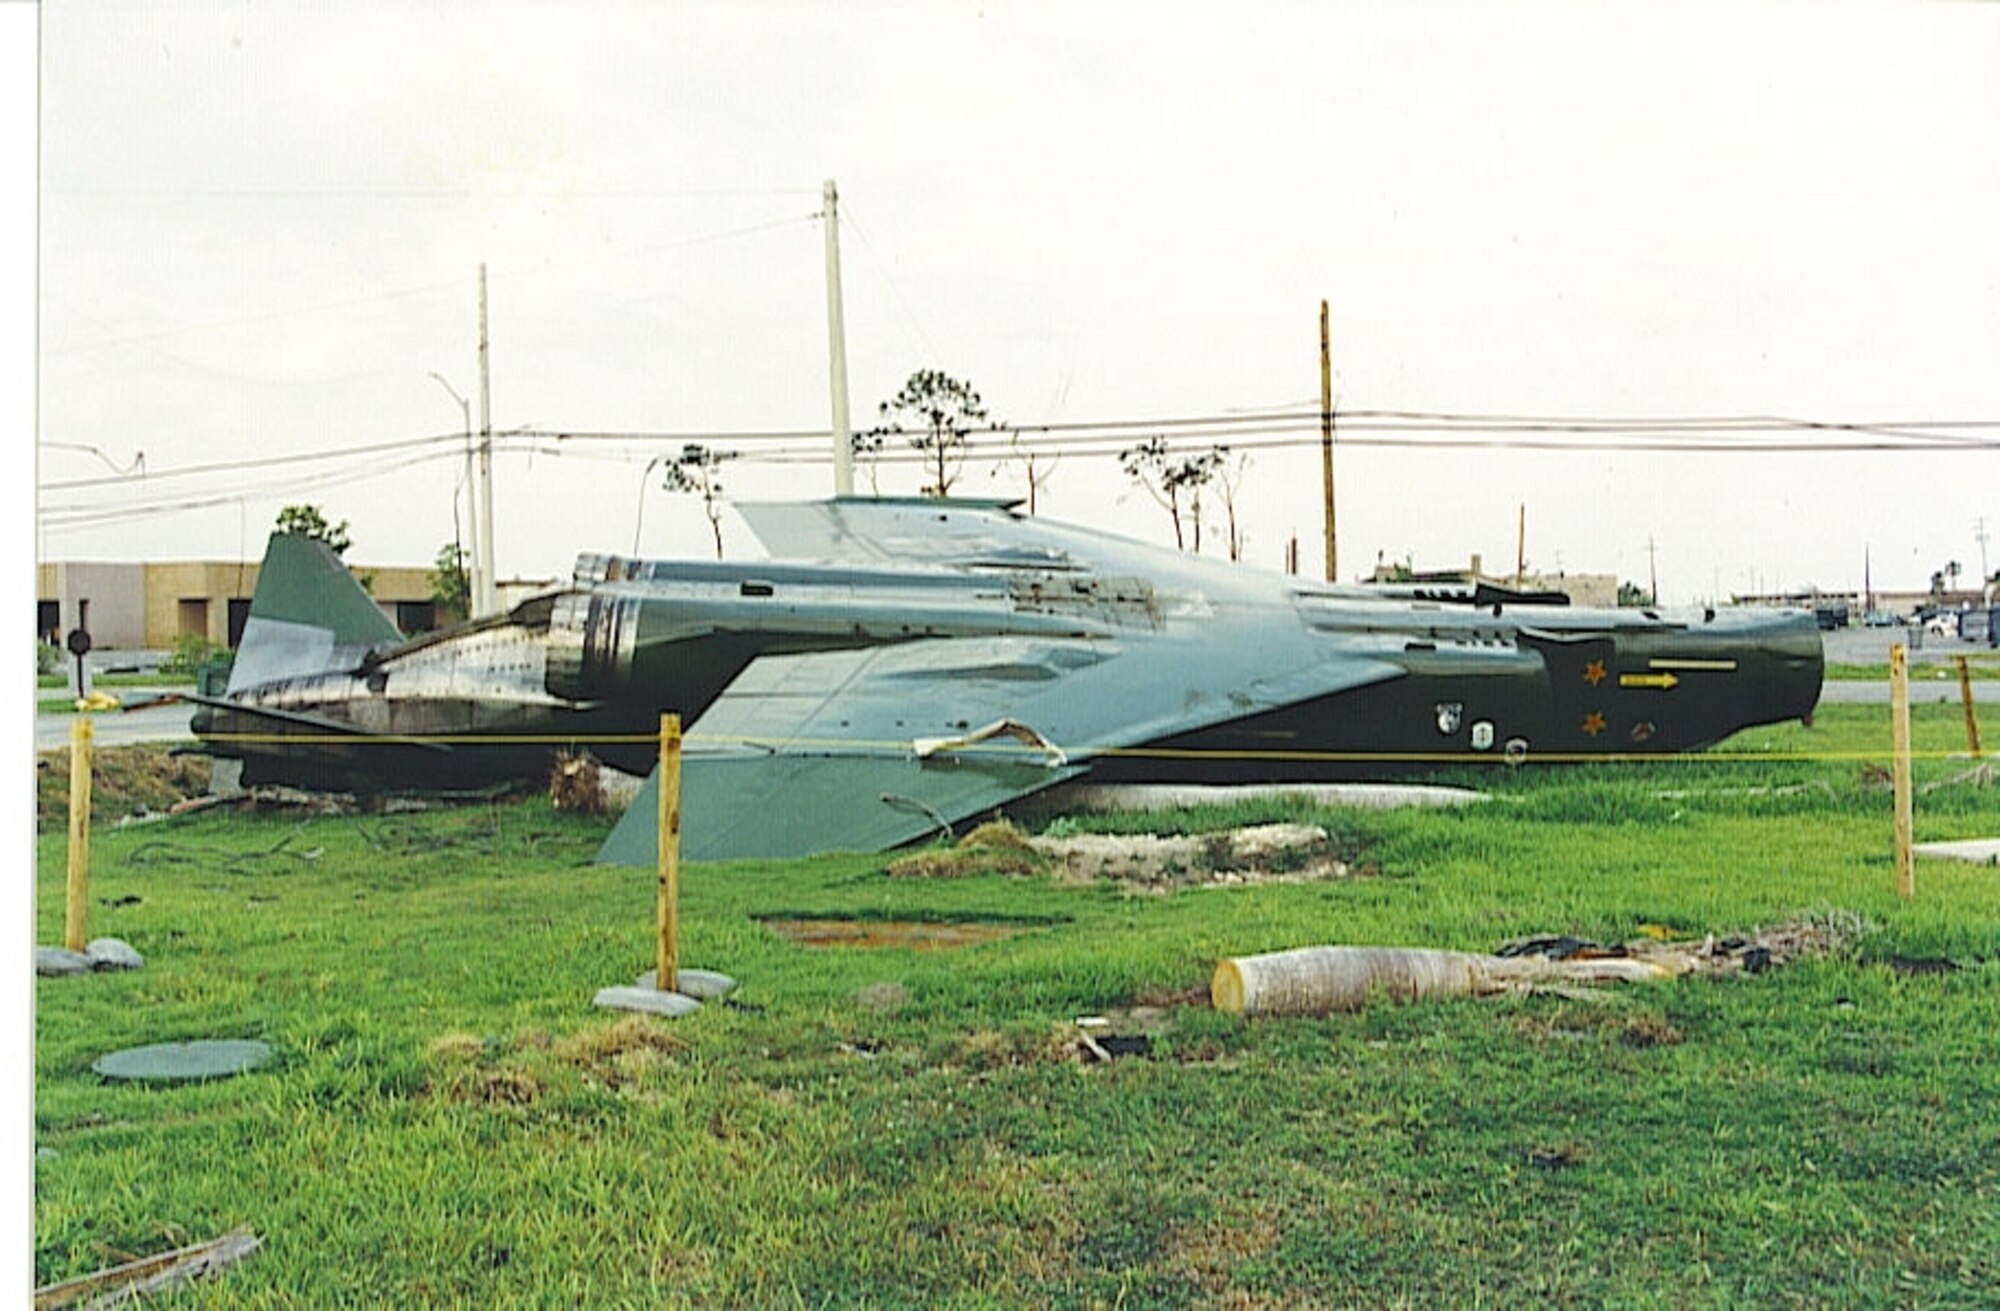 F-4D fighter jet serial number 66-0267 after Hurricane Andrew at Homestead Air Force Base, Fla., August 1992. (USAF file photo)